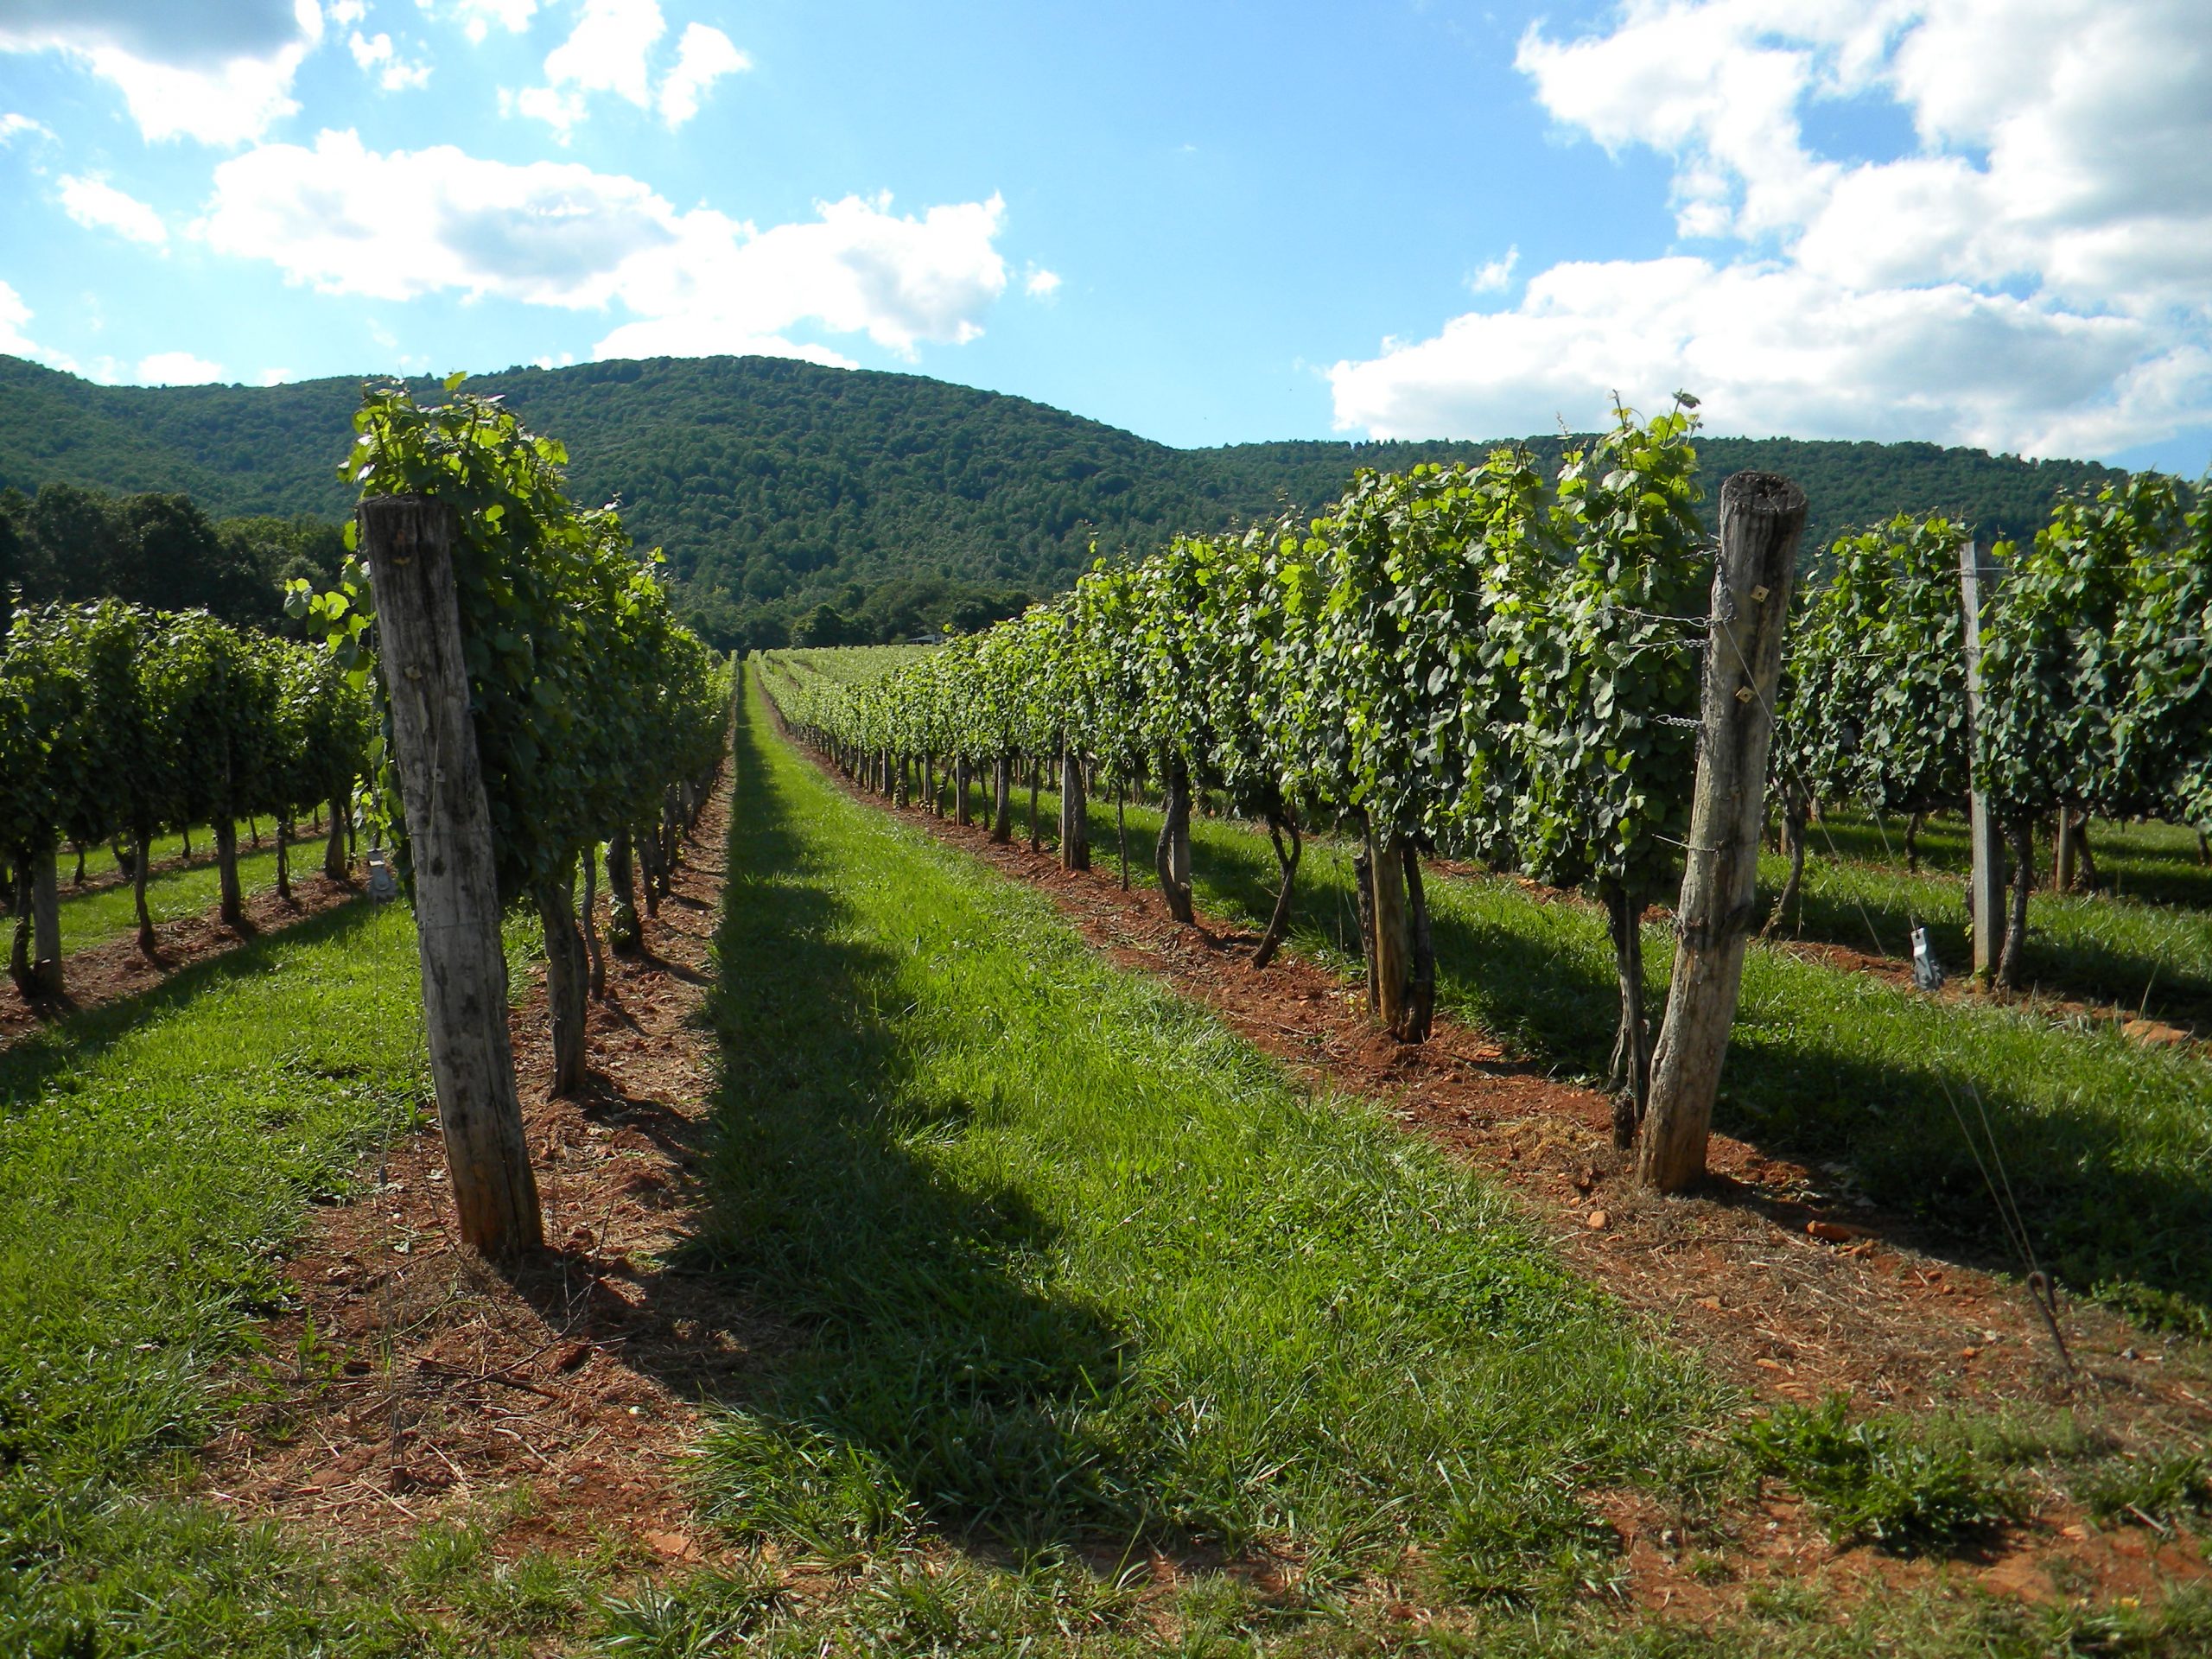 Photo of hundreds of grape vines in perfect rows. Mountains in the background.